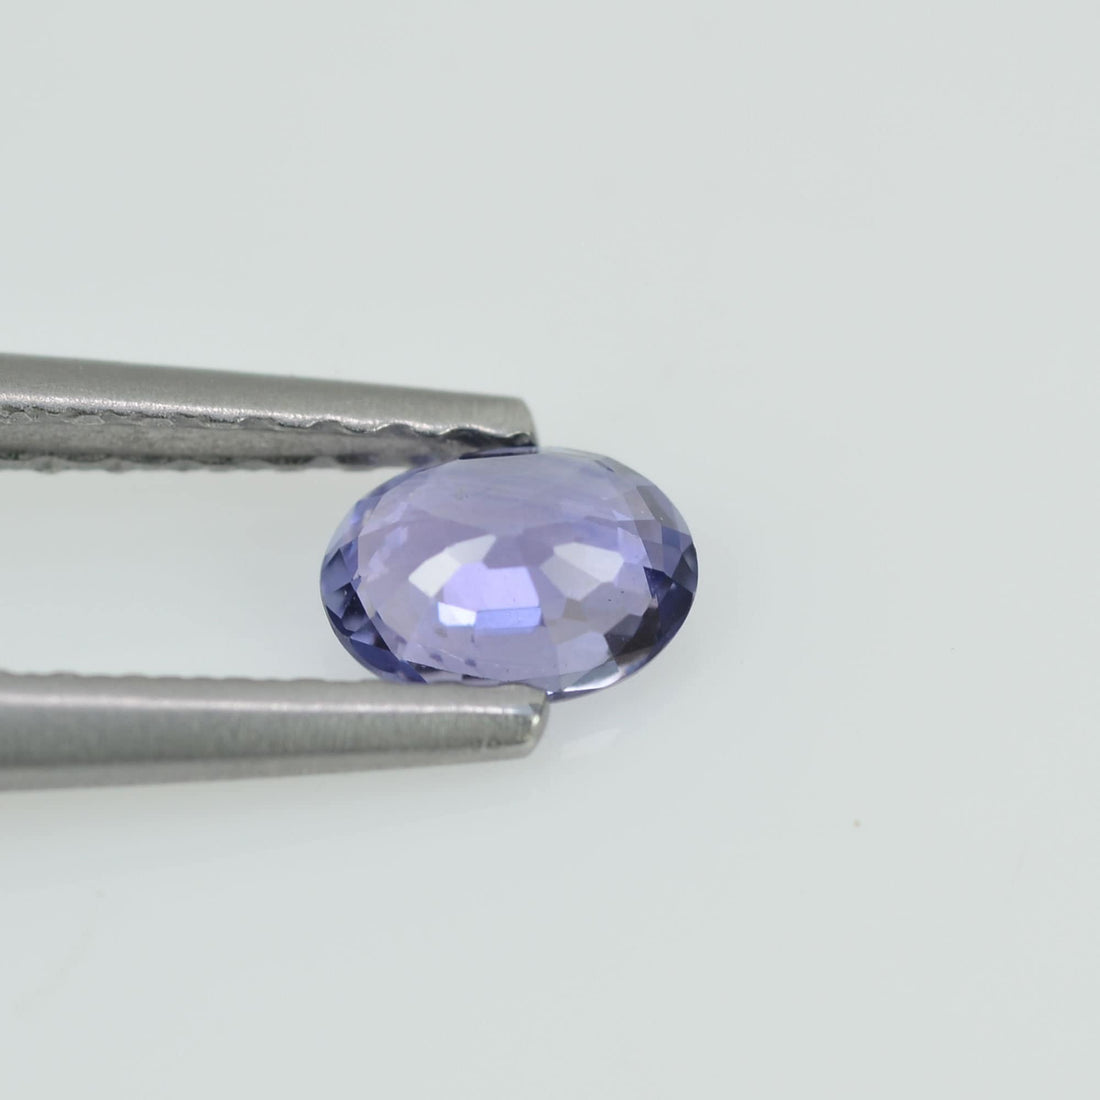 0.32 cts Natural Lavender Sapphire Loose Gemstone Oval Cut